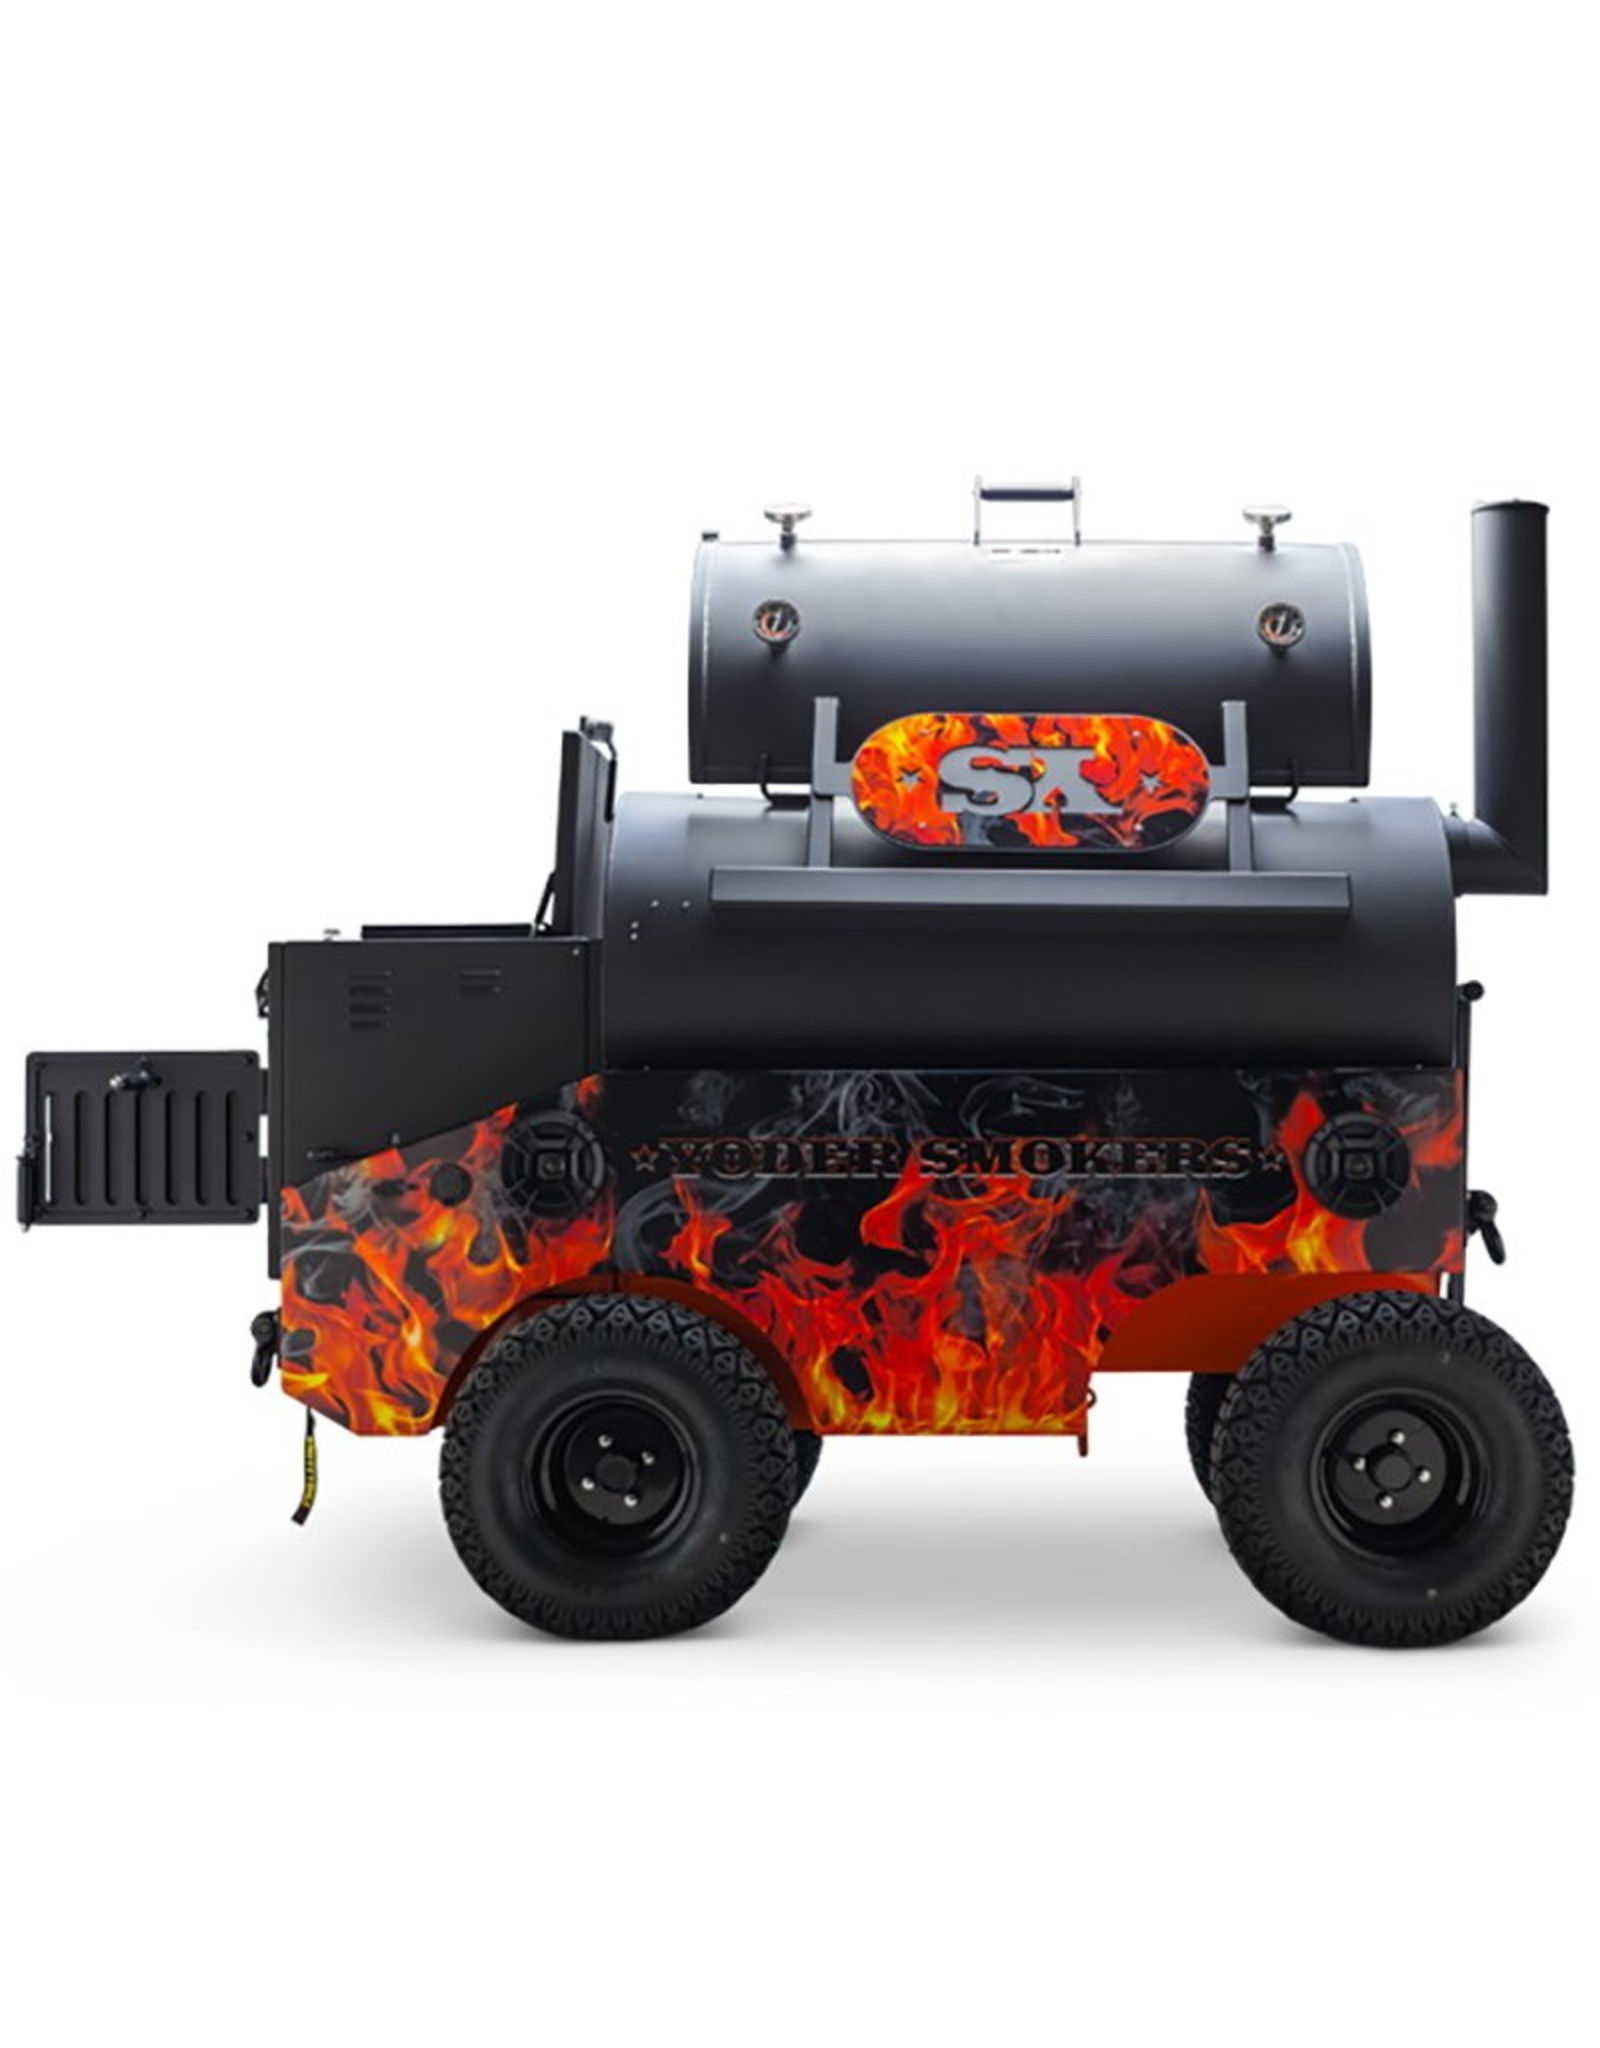 Yoder Smokers CIMARRONs Pellet Grill - Off-Road Cart